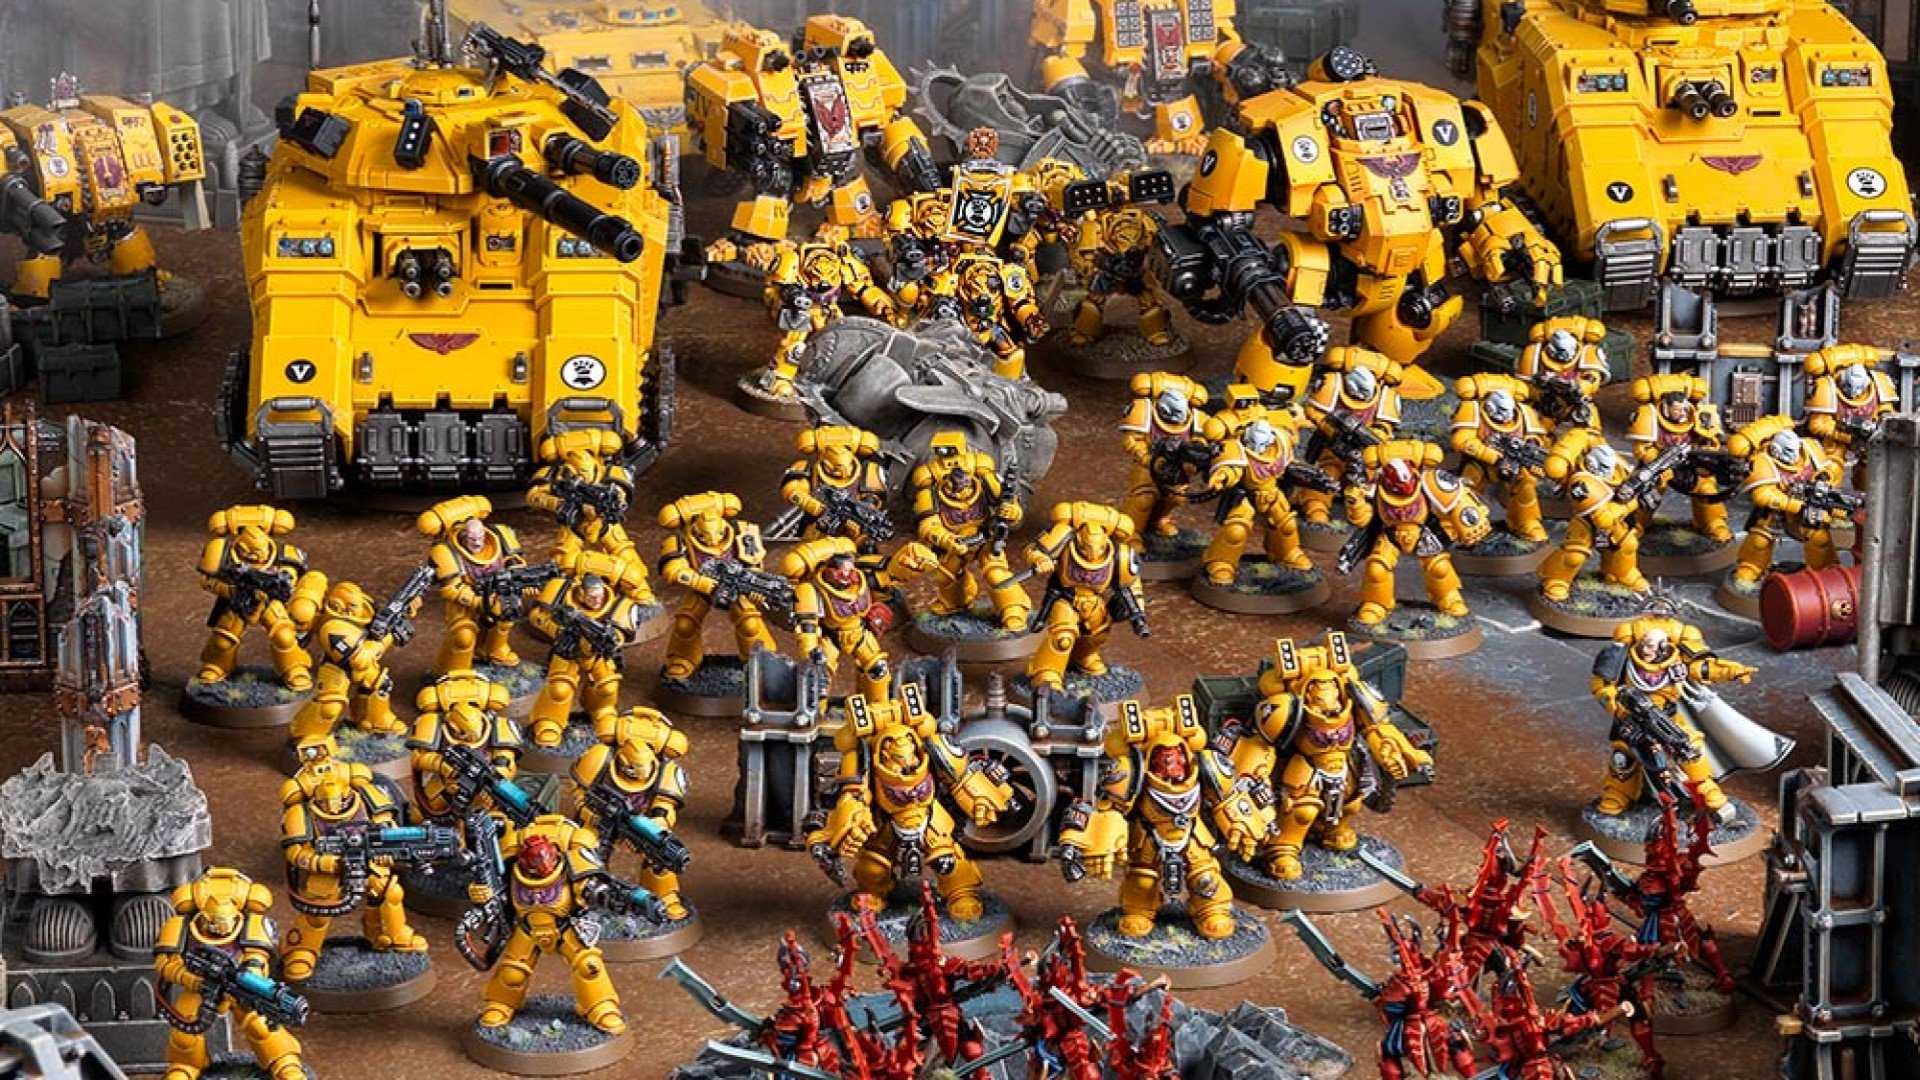 Warhammer 40k Space Marines guide - Warhammer Community photo showing Imperial Fists Primaris models